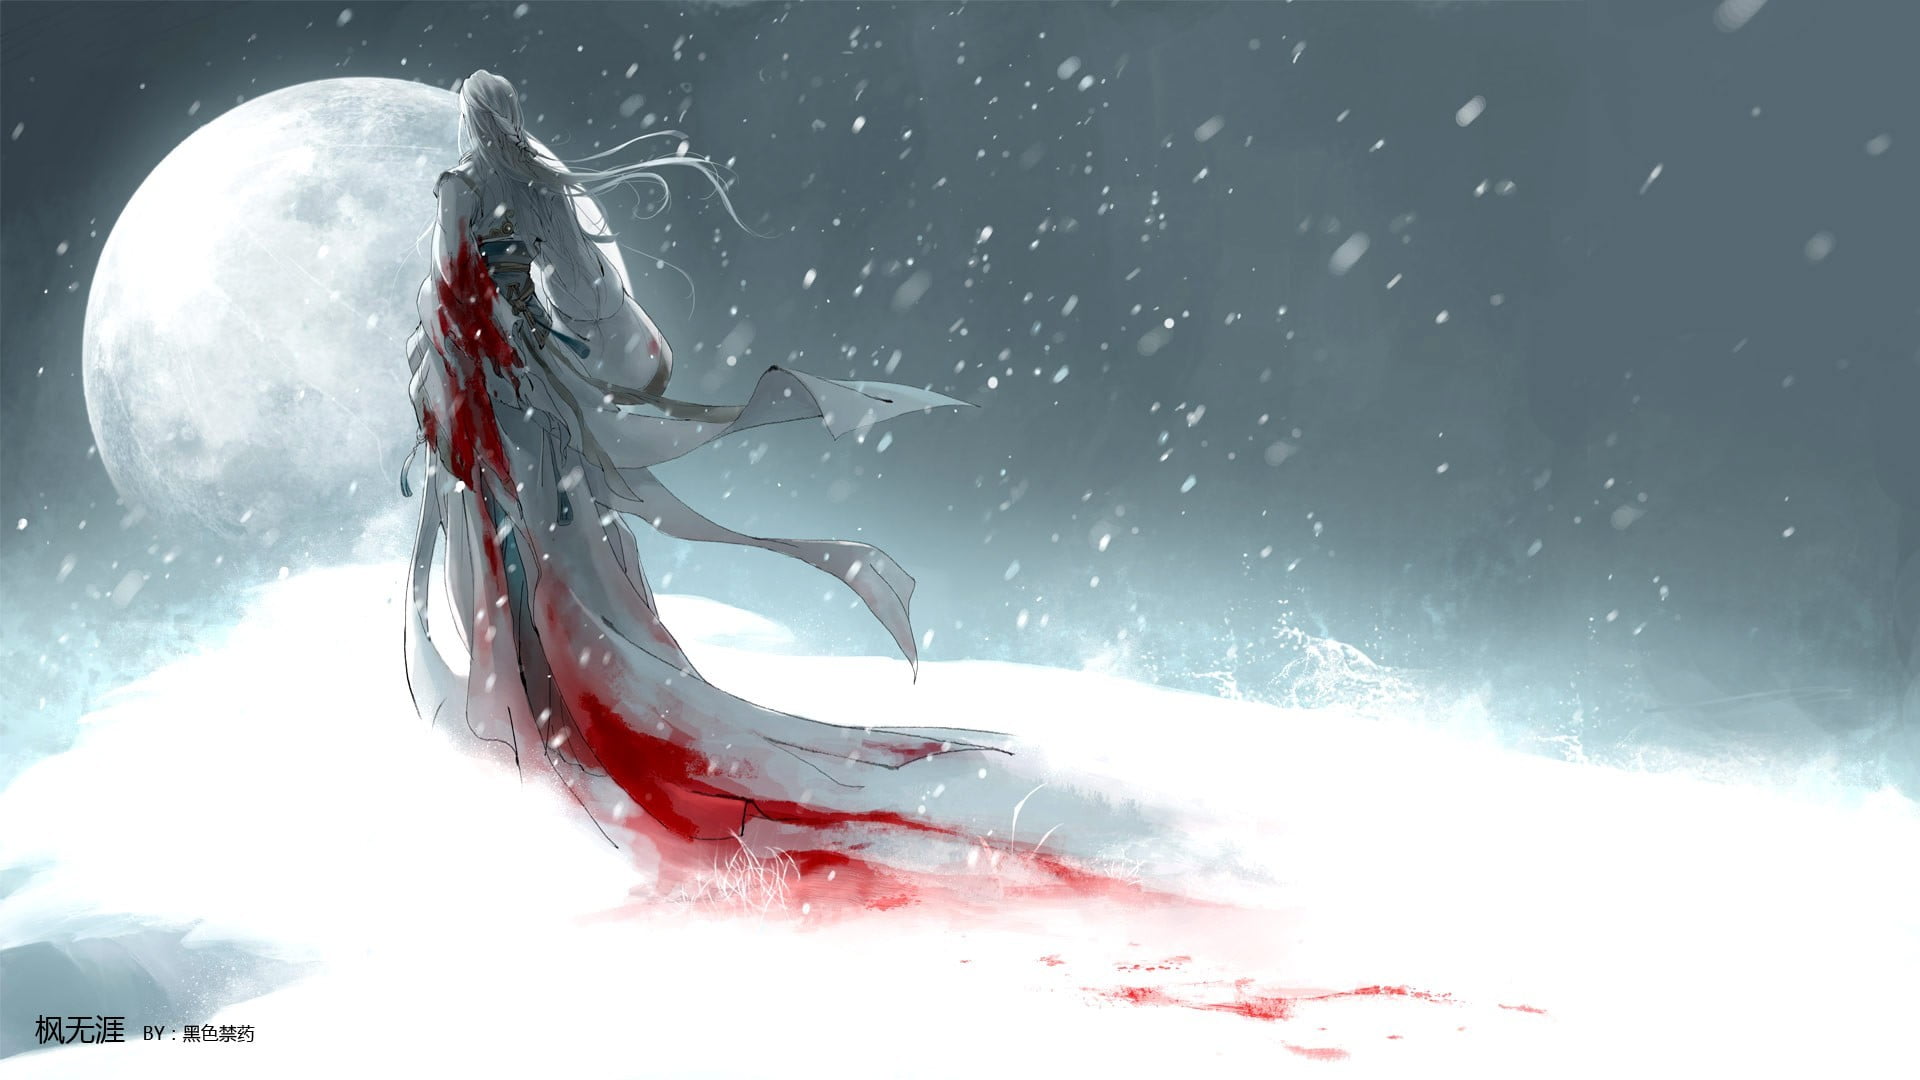 person wearing white and red dress illustration, snow, blood